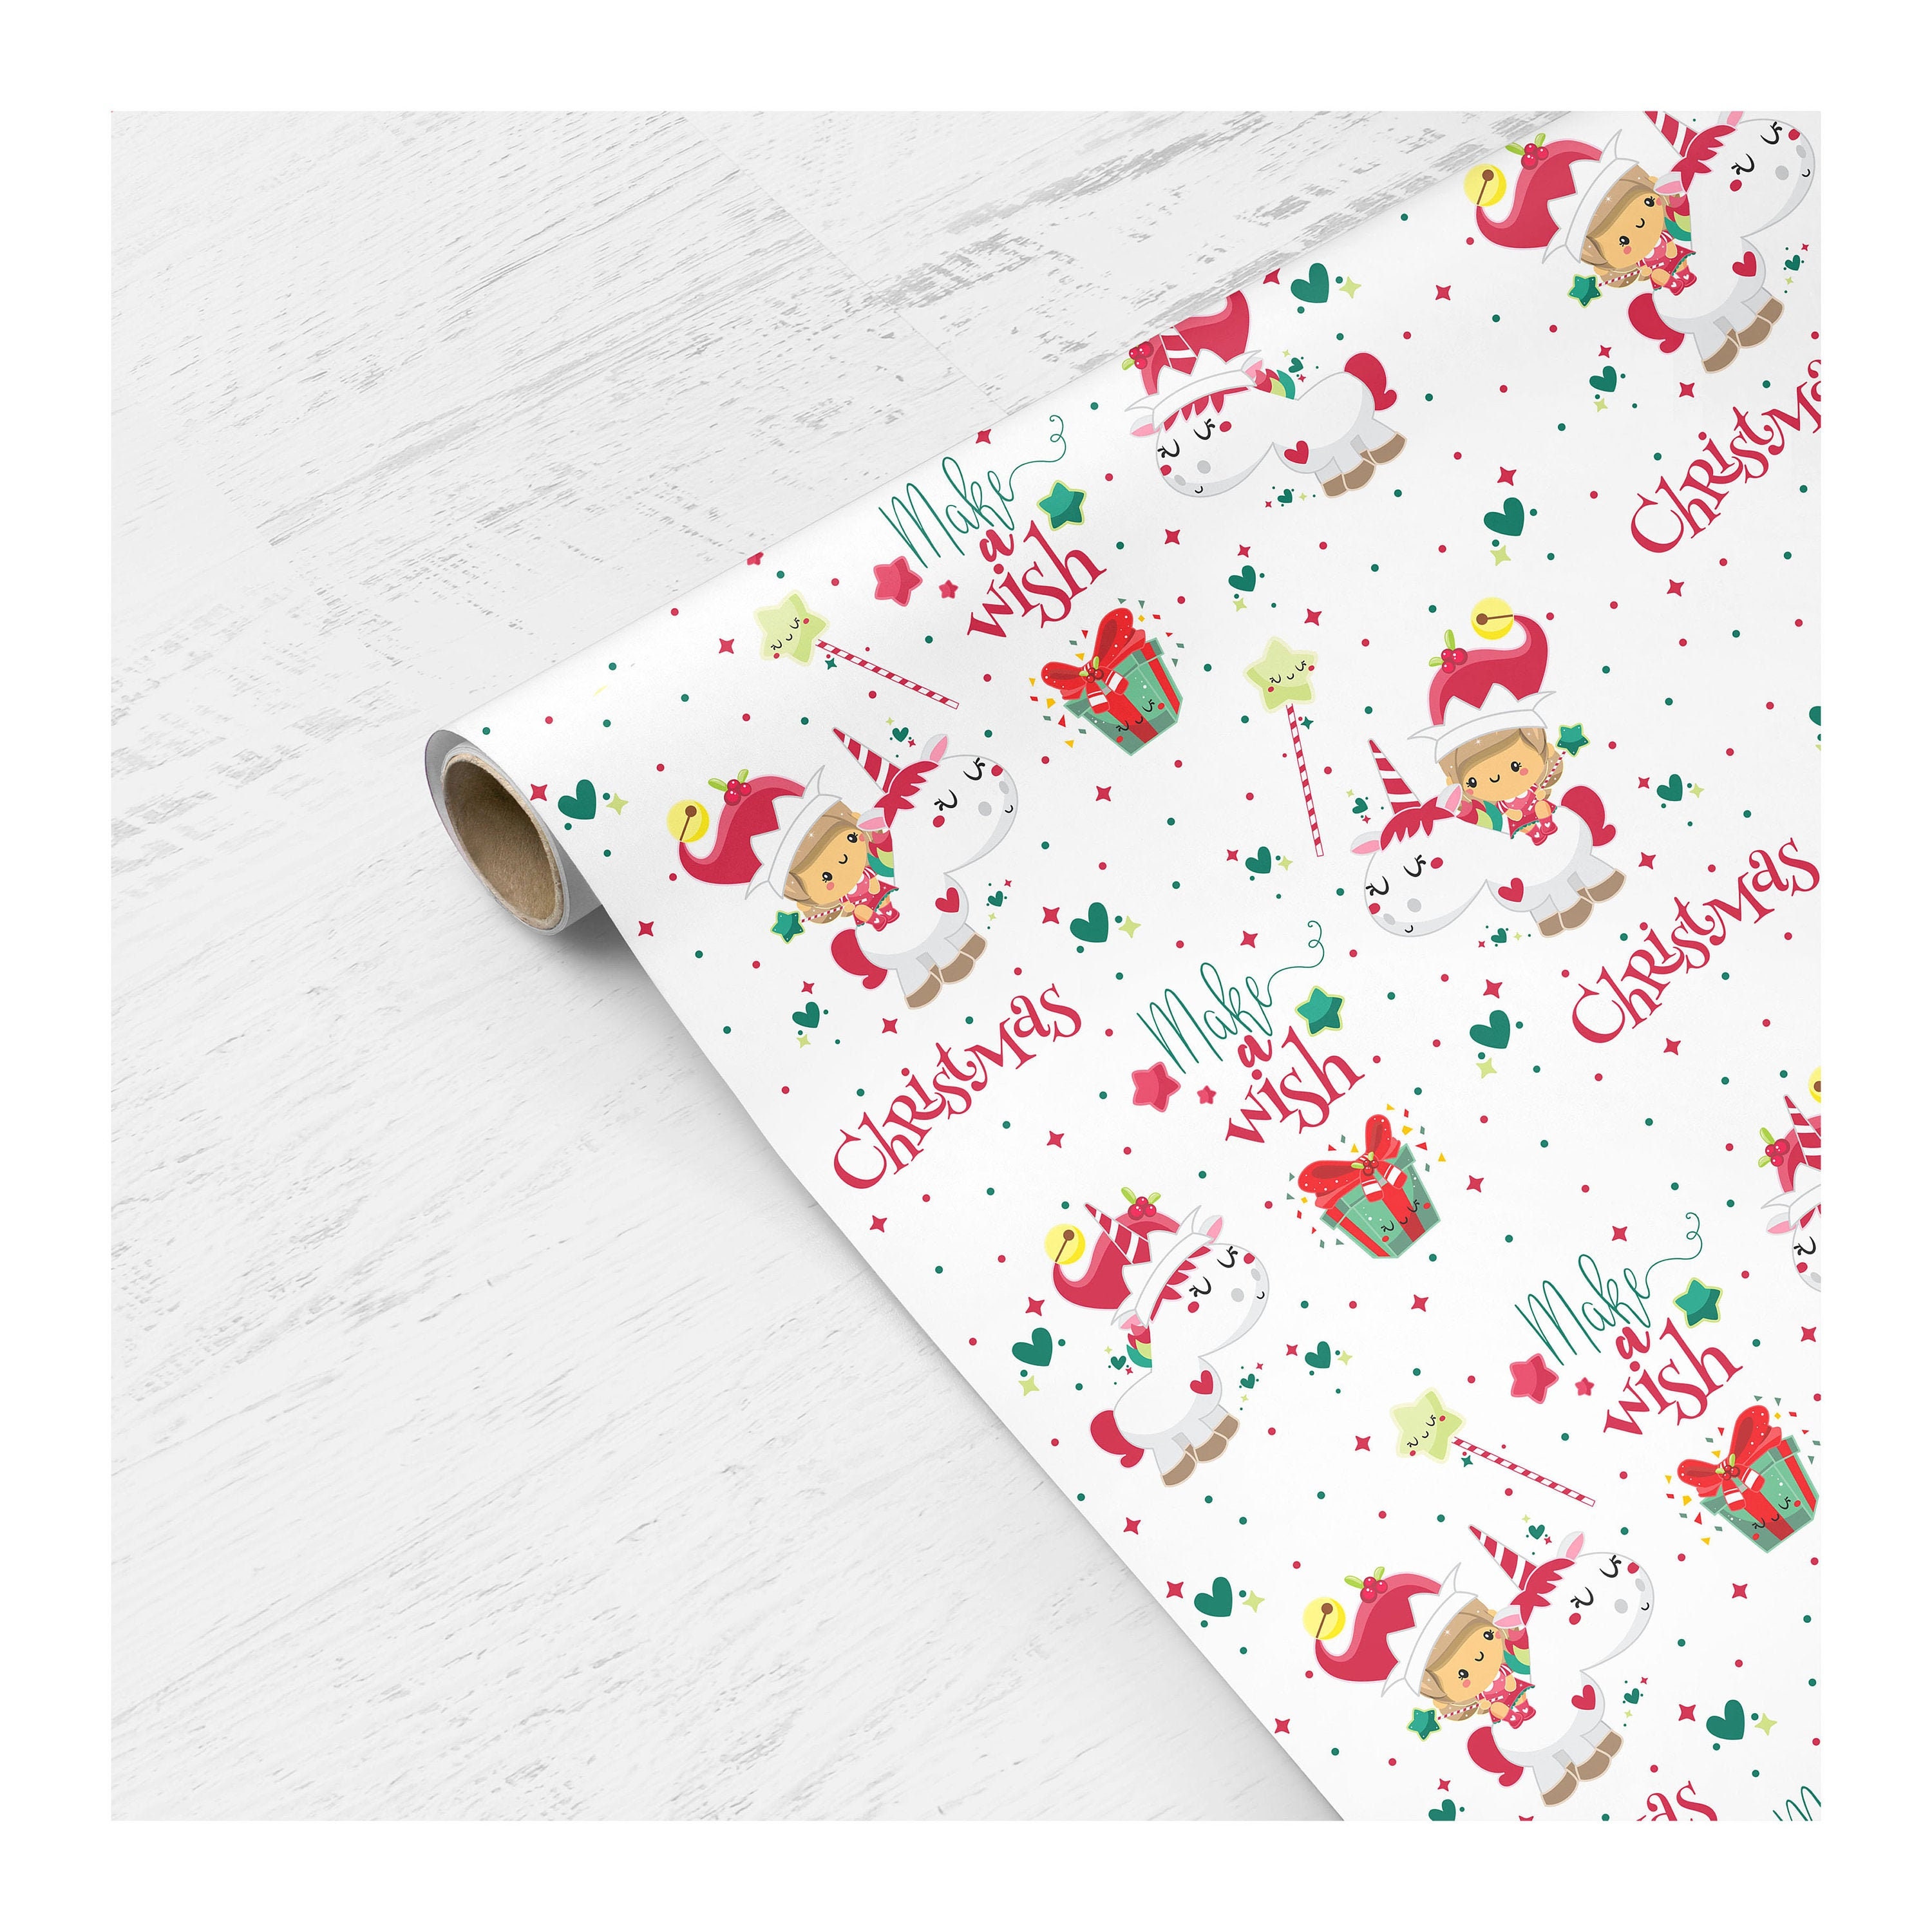  Cute Santa Hat Baseball Gift Wrap Thick Wrapping Paper Bball  Themed Christmas Holiday Party Decoration (20 inch x 30 inch sheet) :  Health & Household